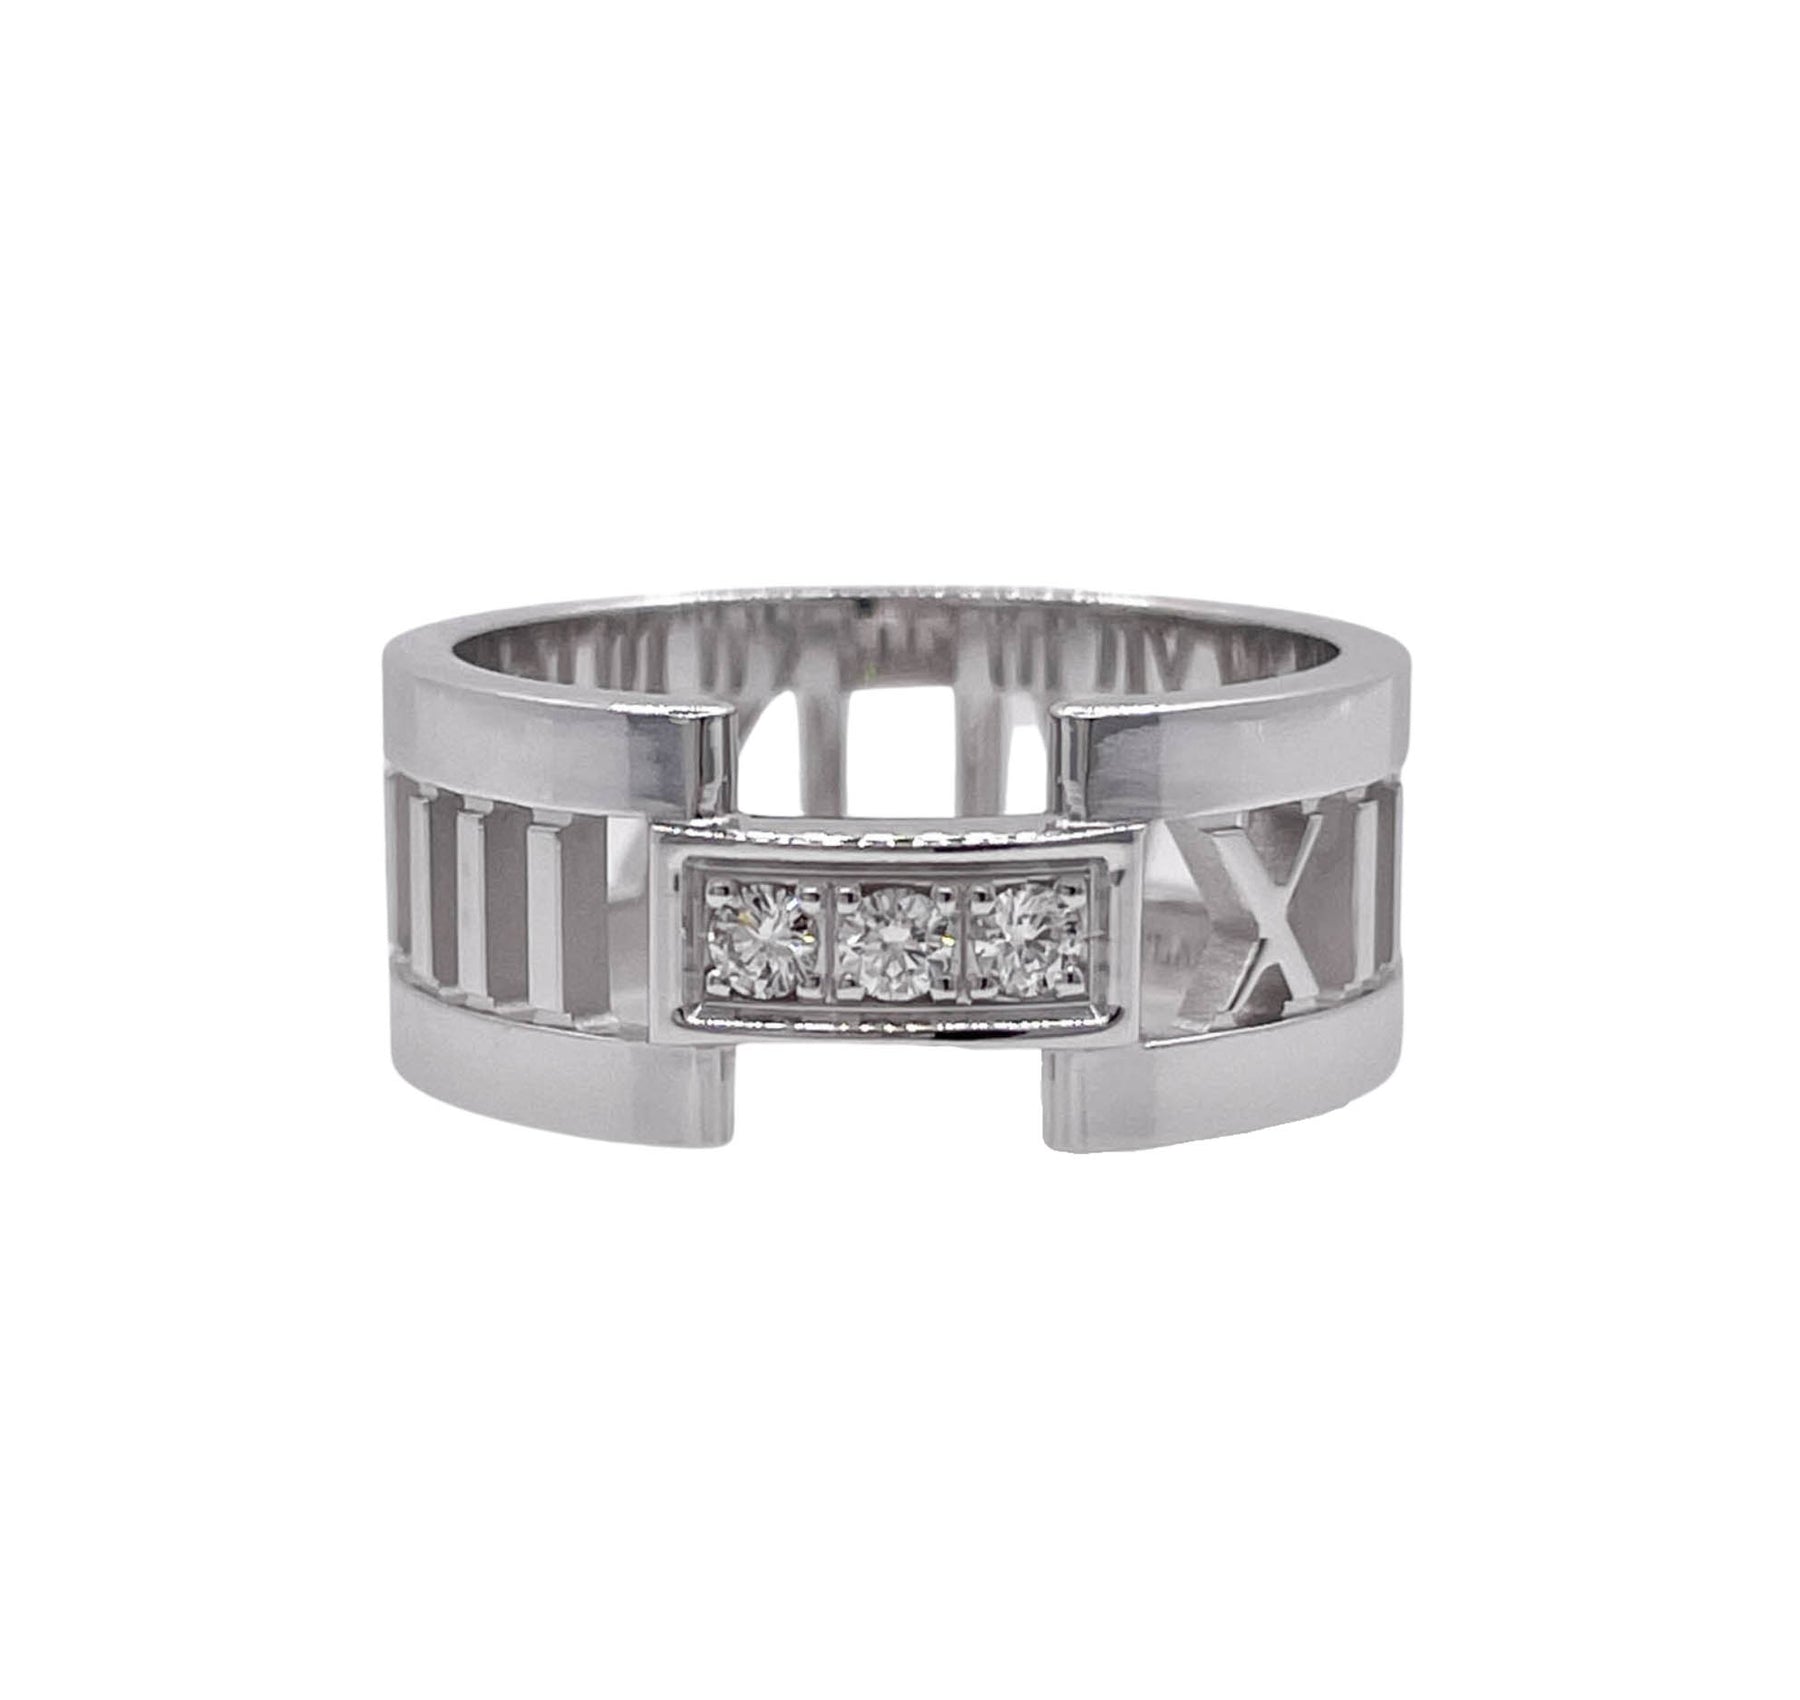 Tiffany & Co 18K White Gold Atlas Roman Numerals Band Ring. Size 6